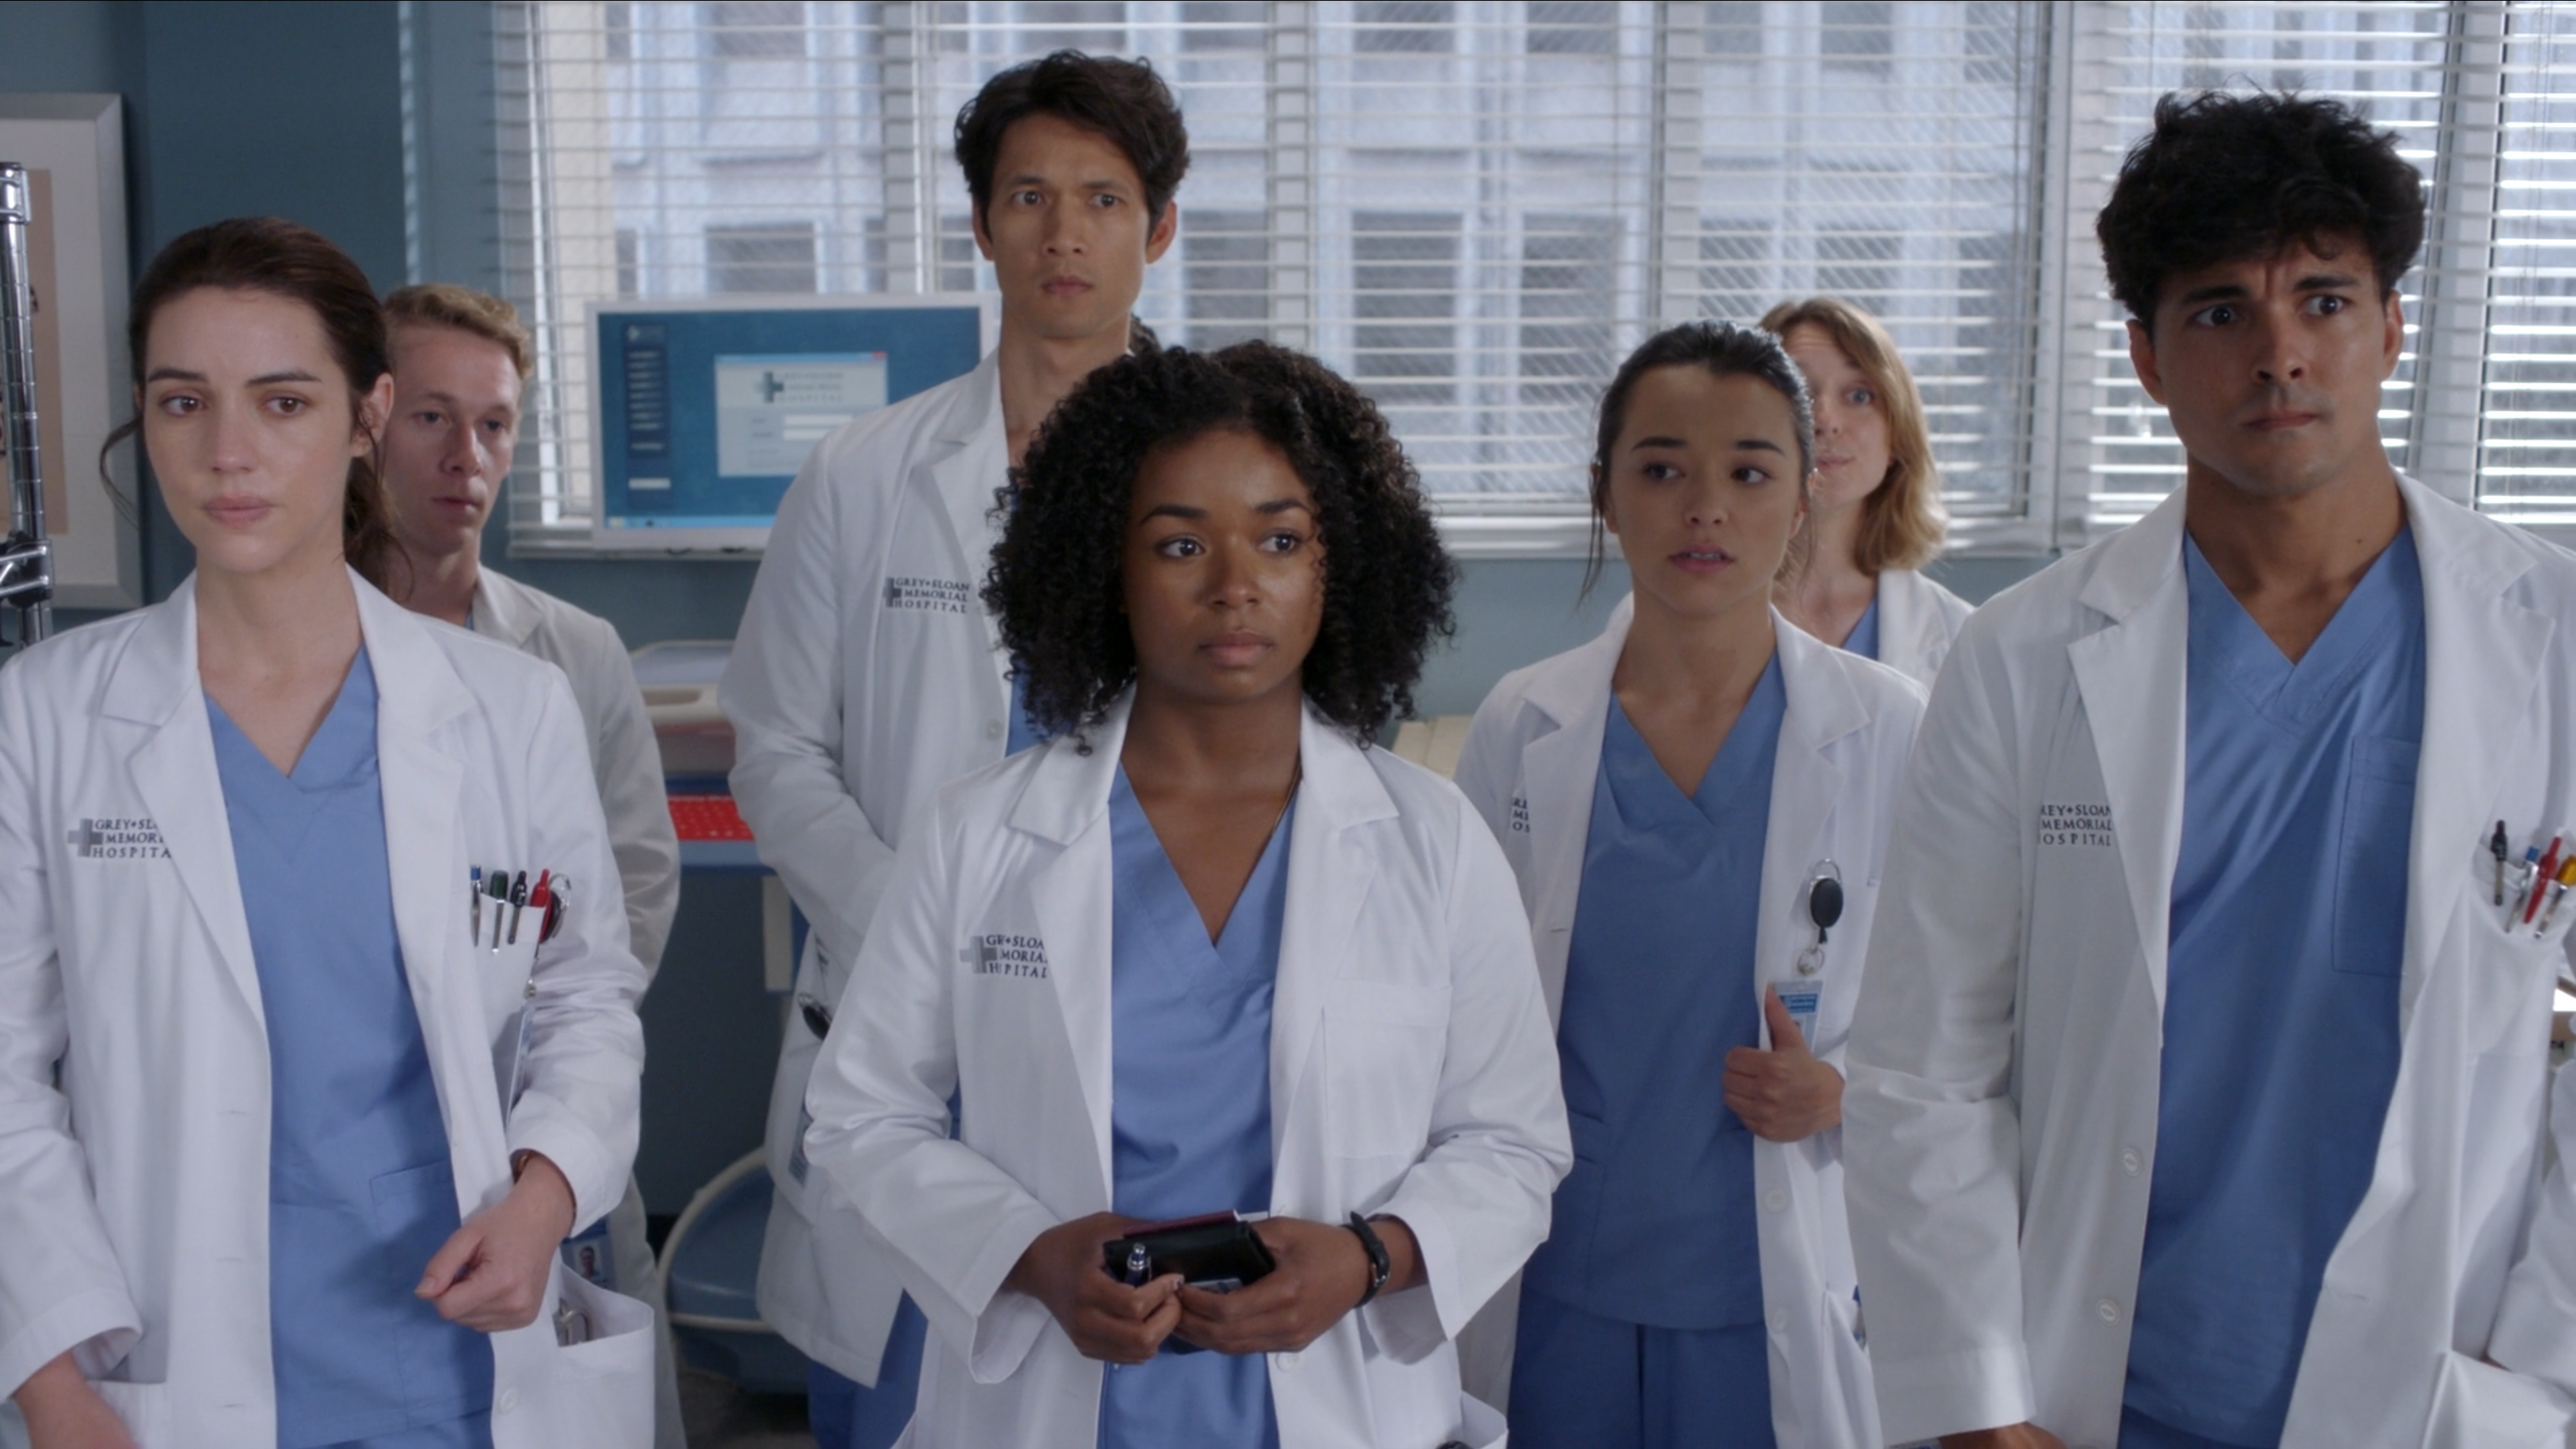 The 5 New Interns of 'Grey's Anatomy' Reveal All the Details About Their  Debuts in a Behind-the-Scenes Interview